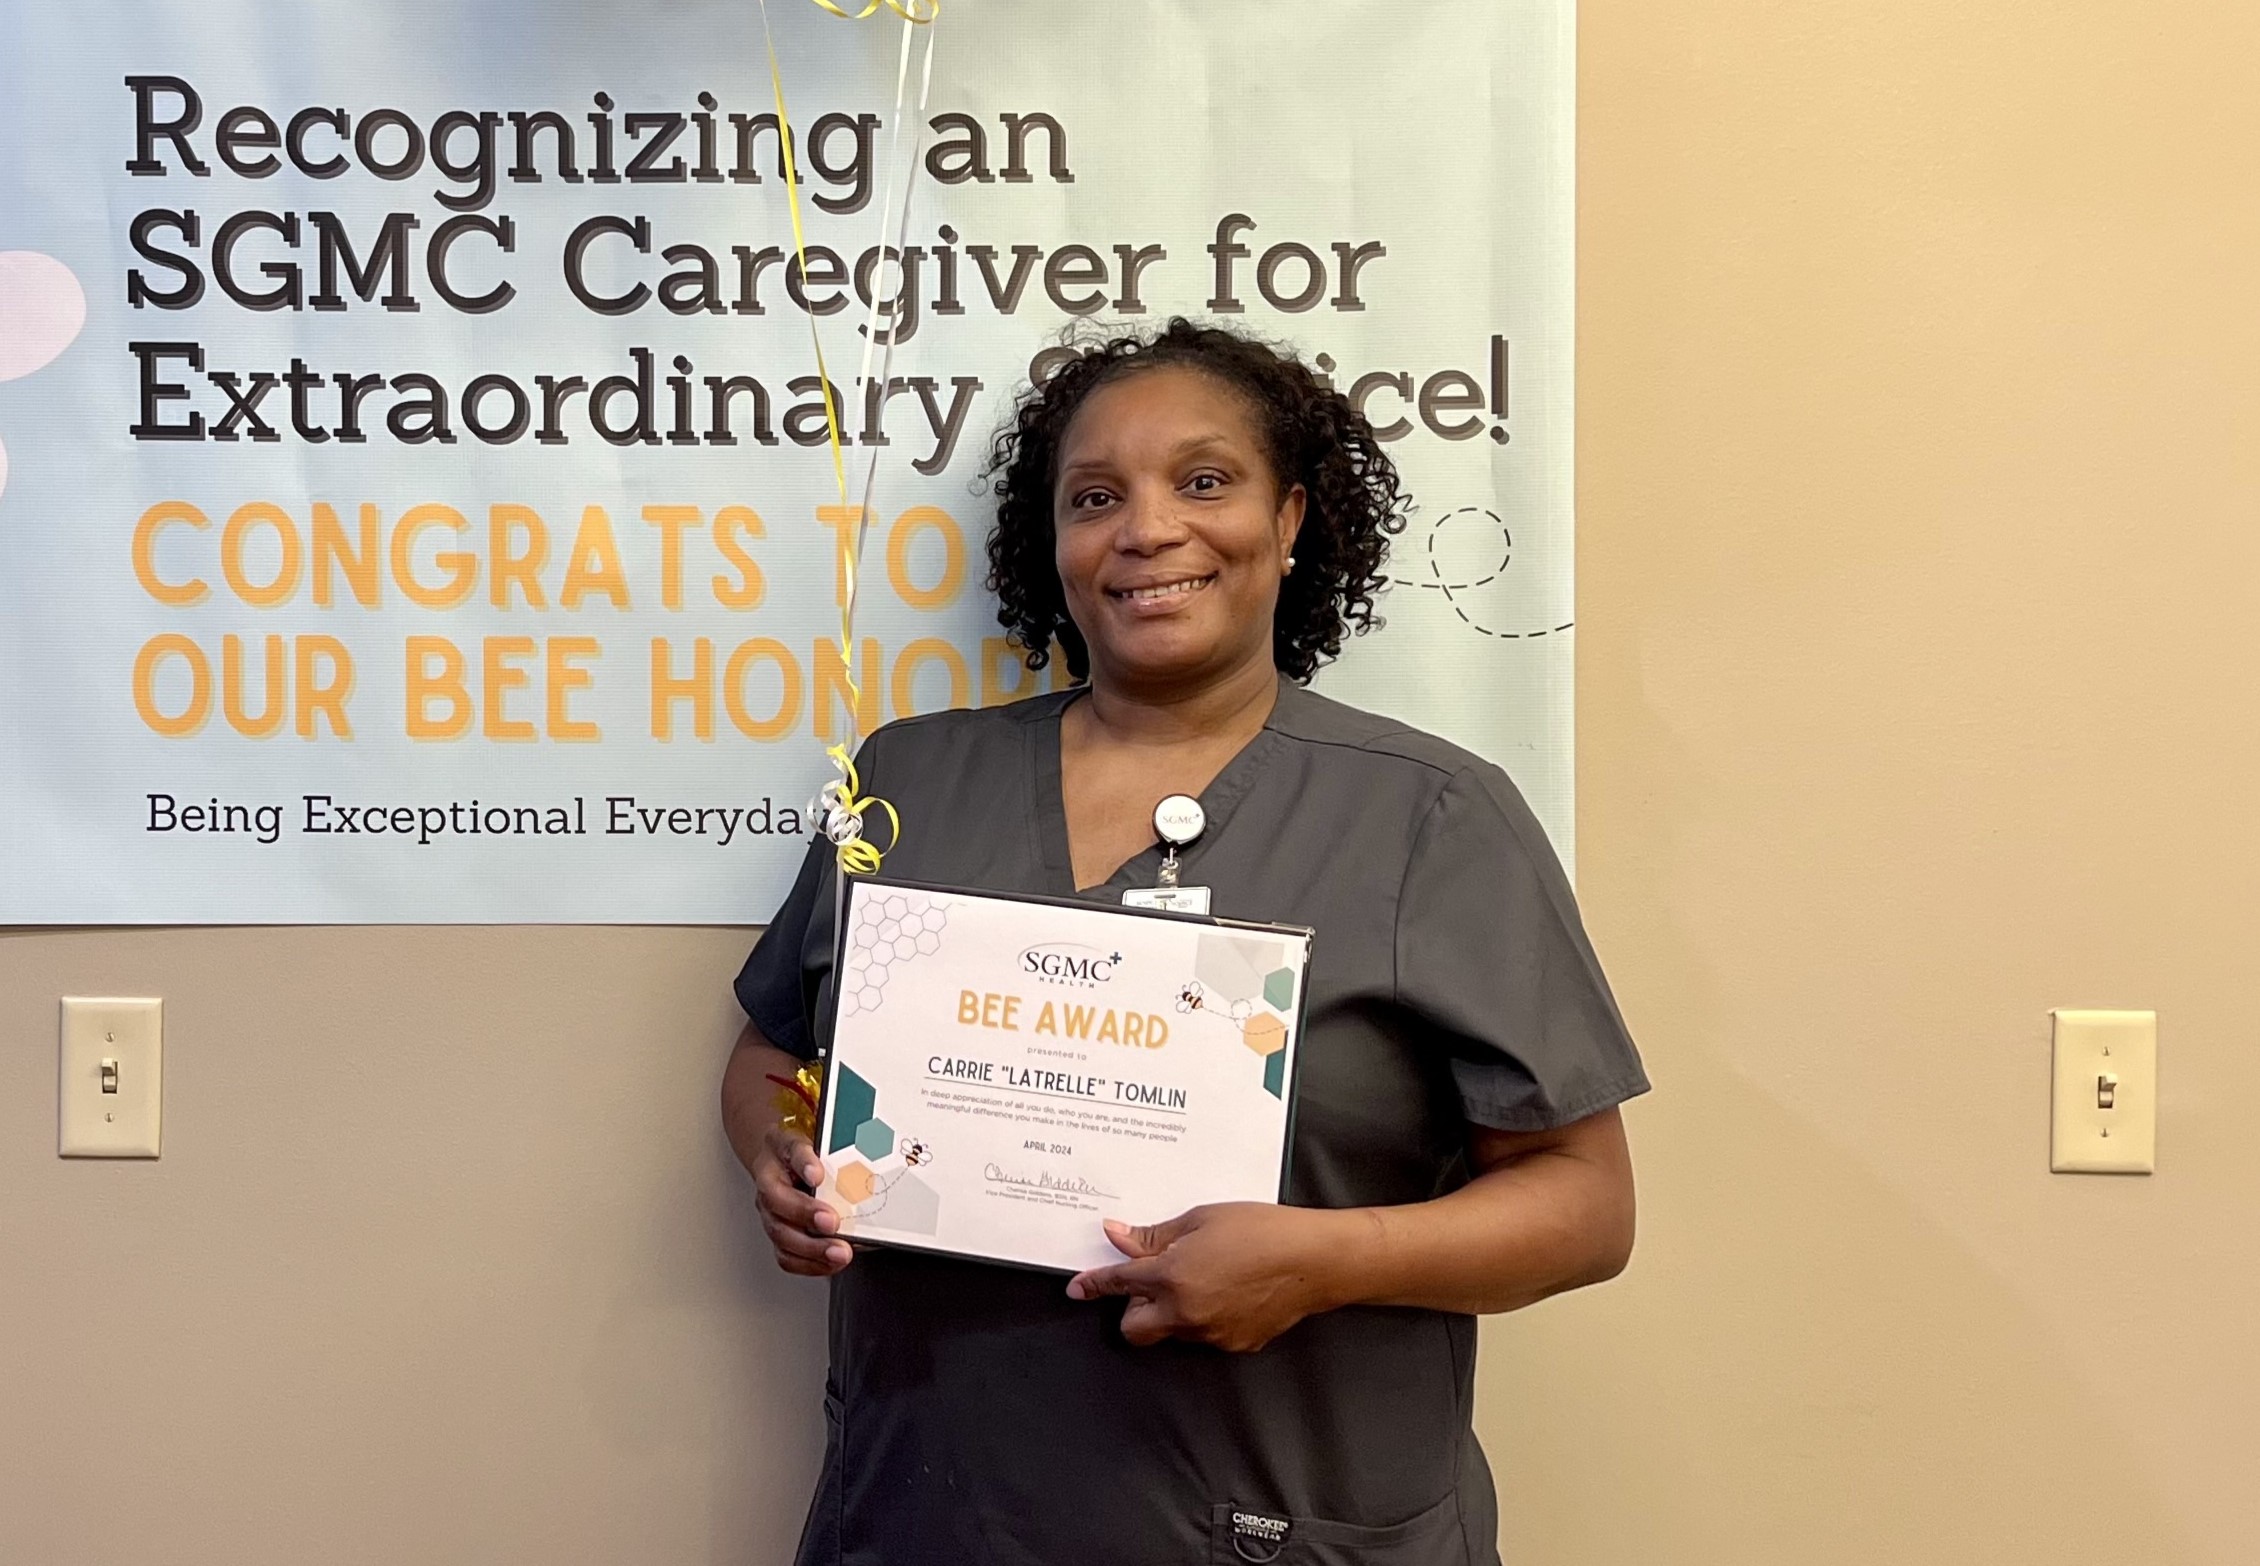 Hospice Nurse Assistant Earns BEE Award for Exceptional Patient Care and Teamwork